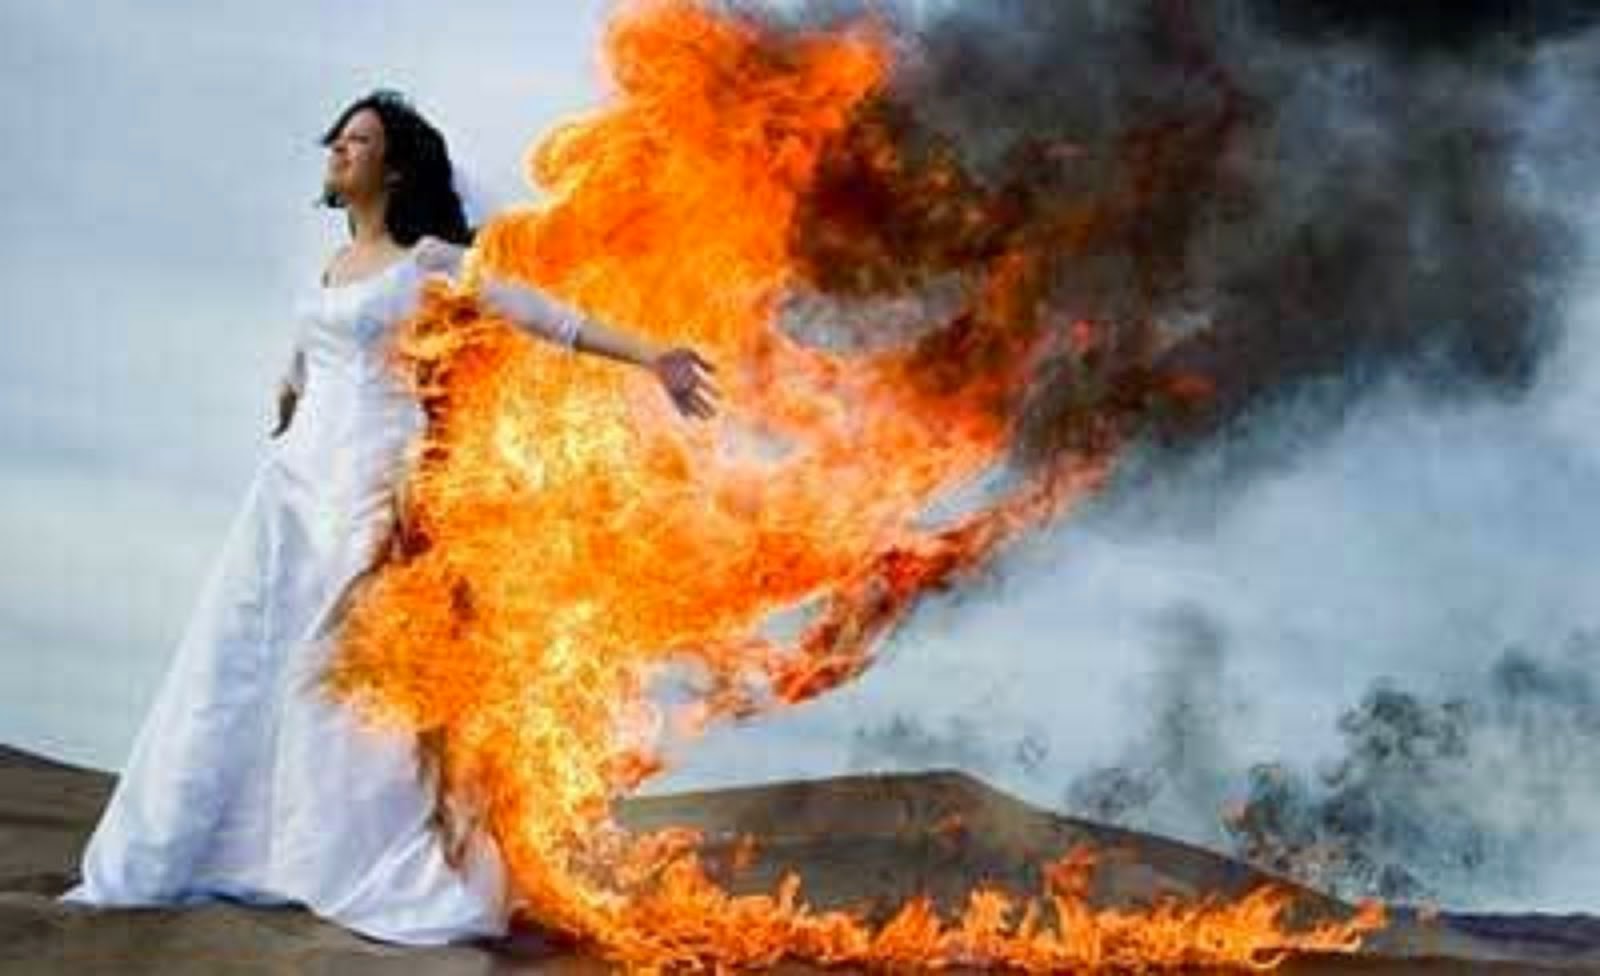 THE BRIDE OF CHRIST BURNS IN HELL